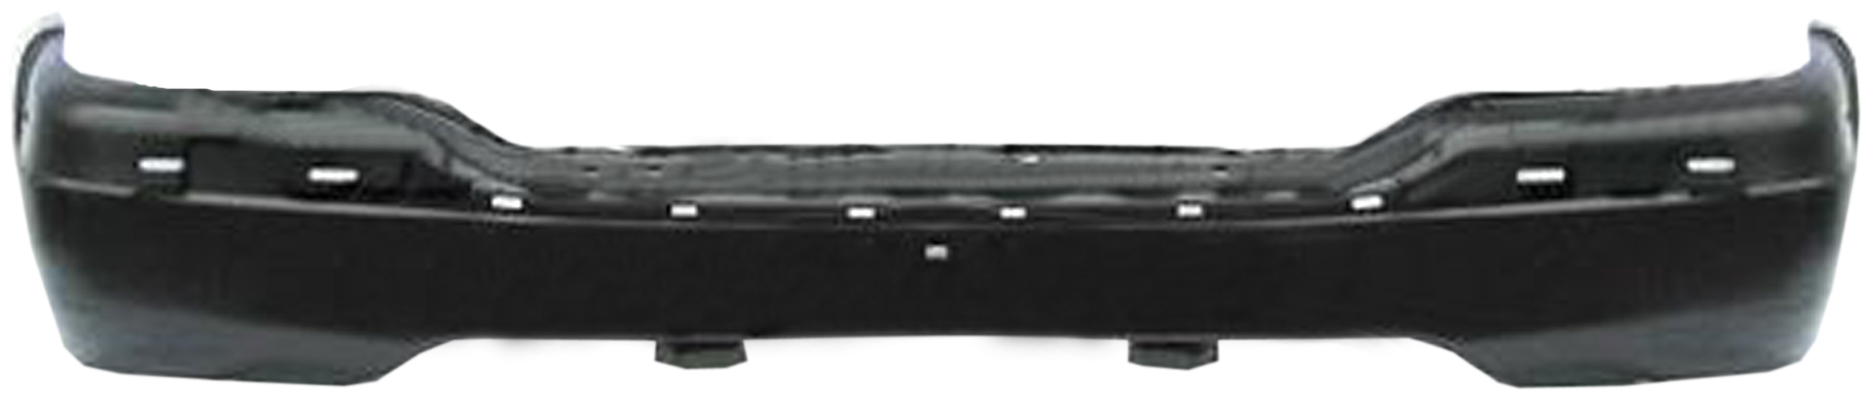 Aftermarket METAL FRONT BUMPERS for CHEVROLET - SUBURBAN 2500, SUBURBAN 2500,00-06,Front bumper face bar